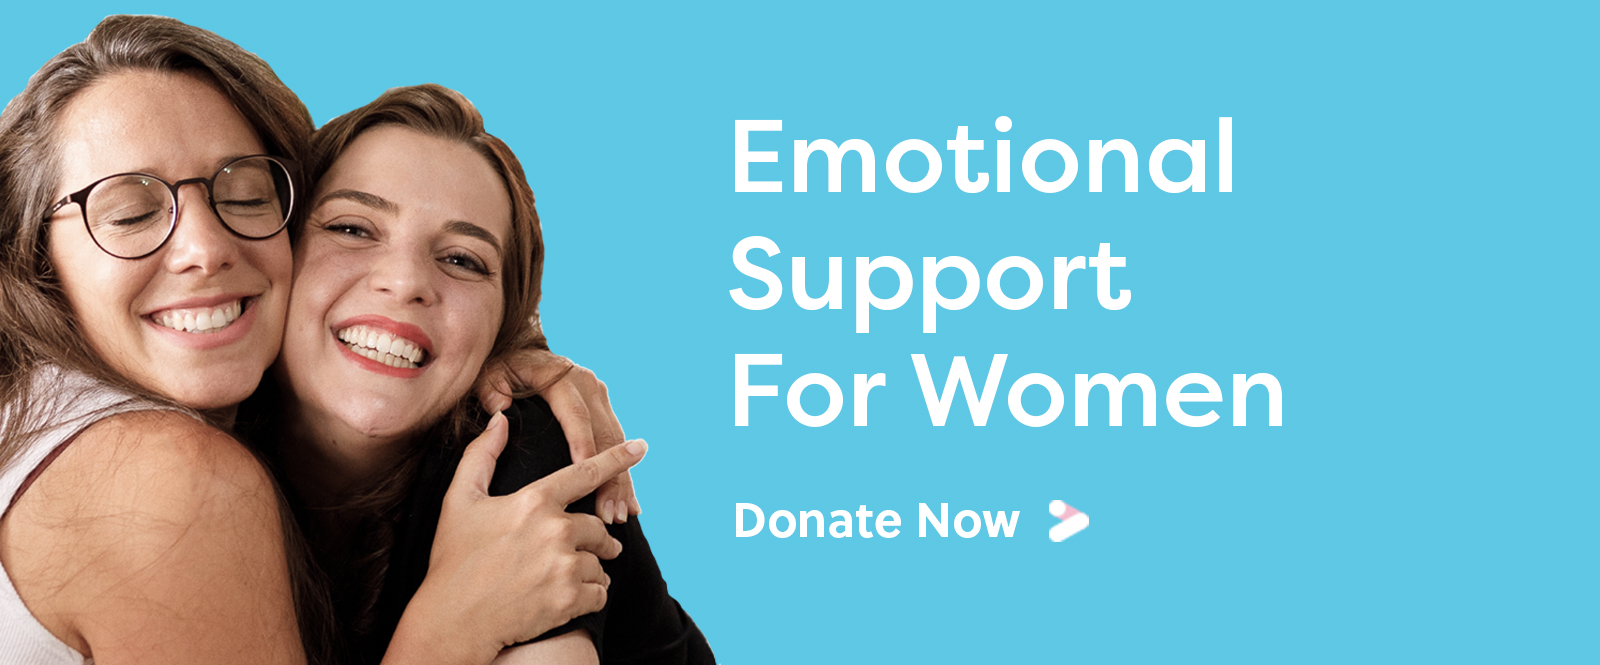 Emotional Support for Women